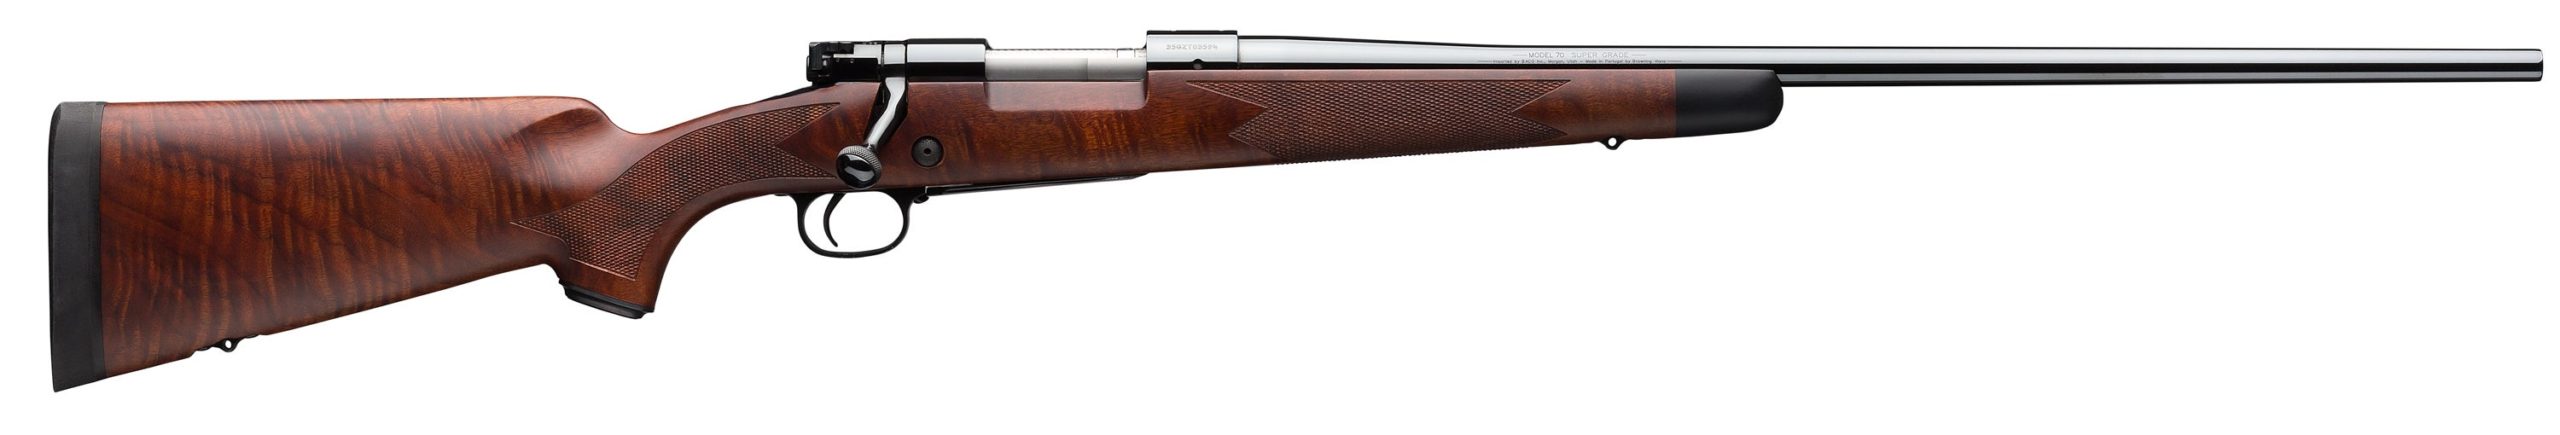 A Winchester Model 70 bolt-action rifle.